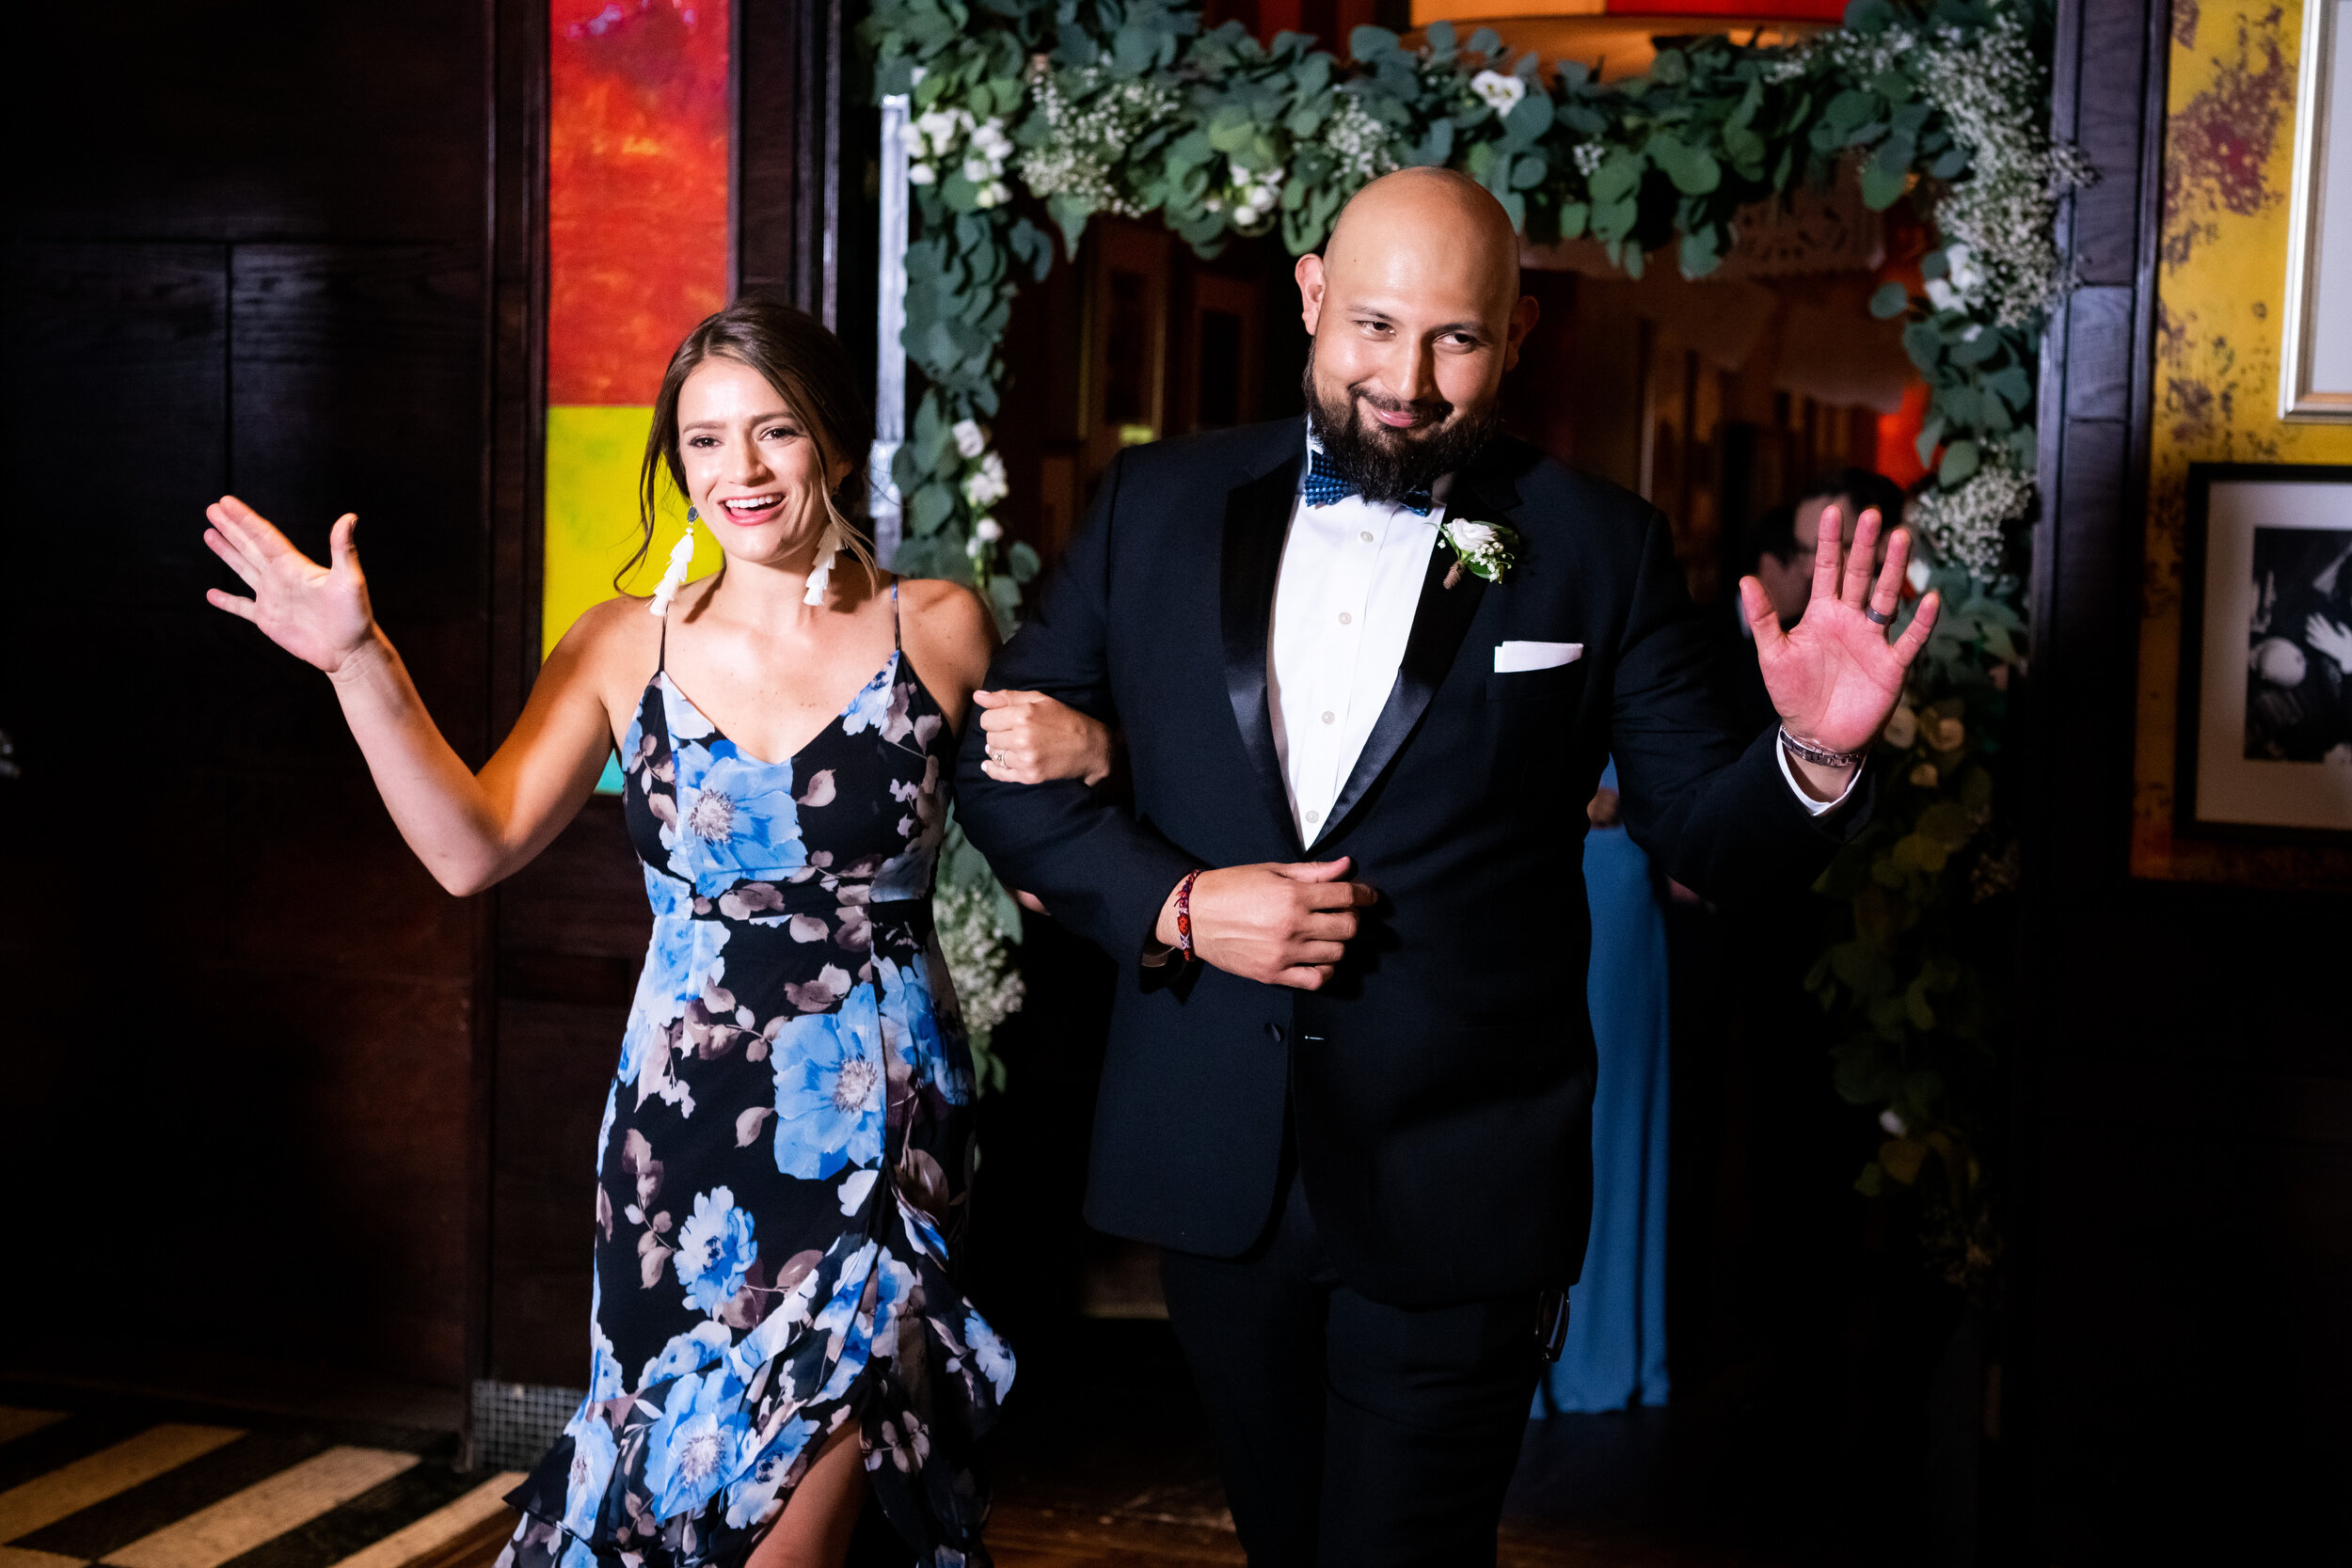 Wedding party introductions: Carnivale Chicago Wedding captured by J. Brown Photography